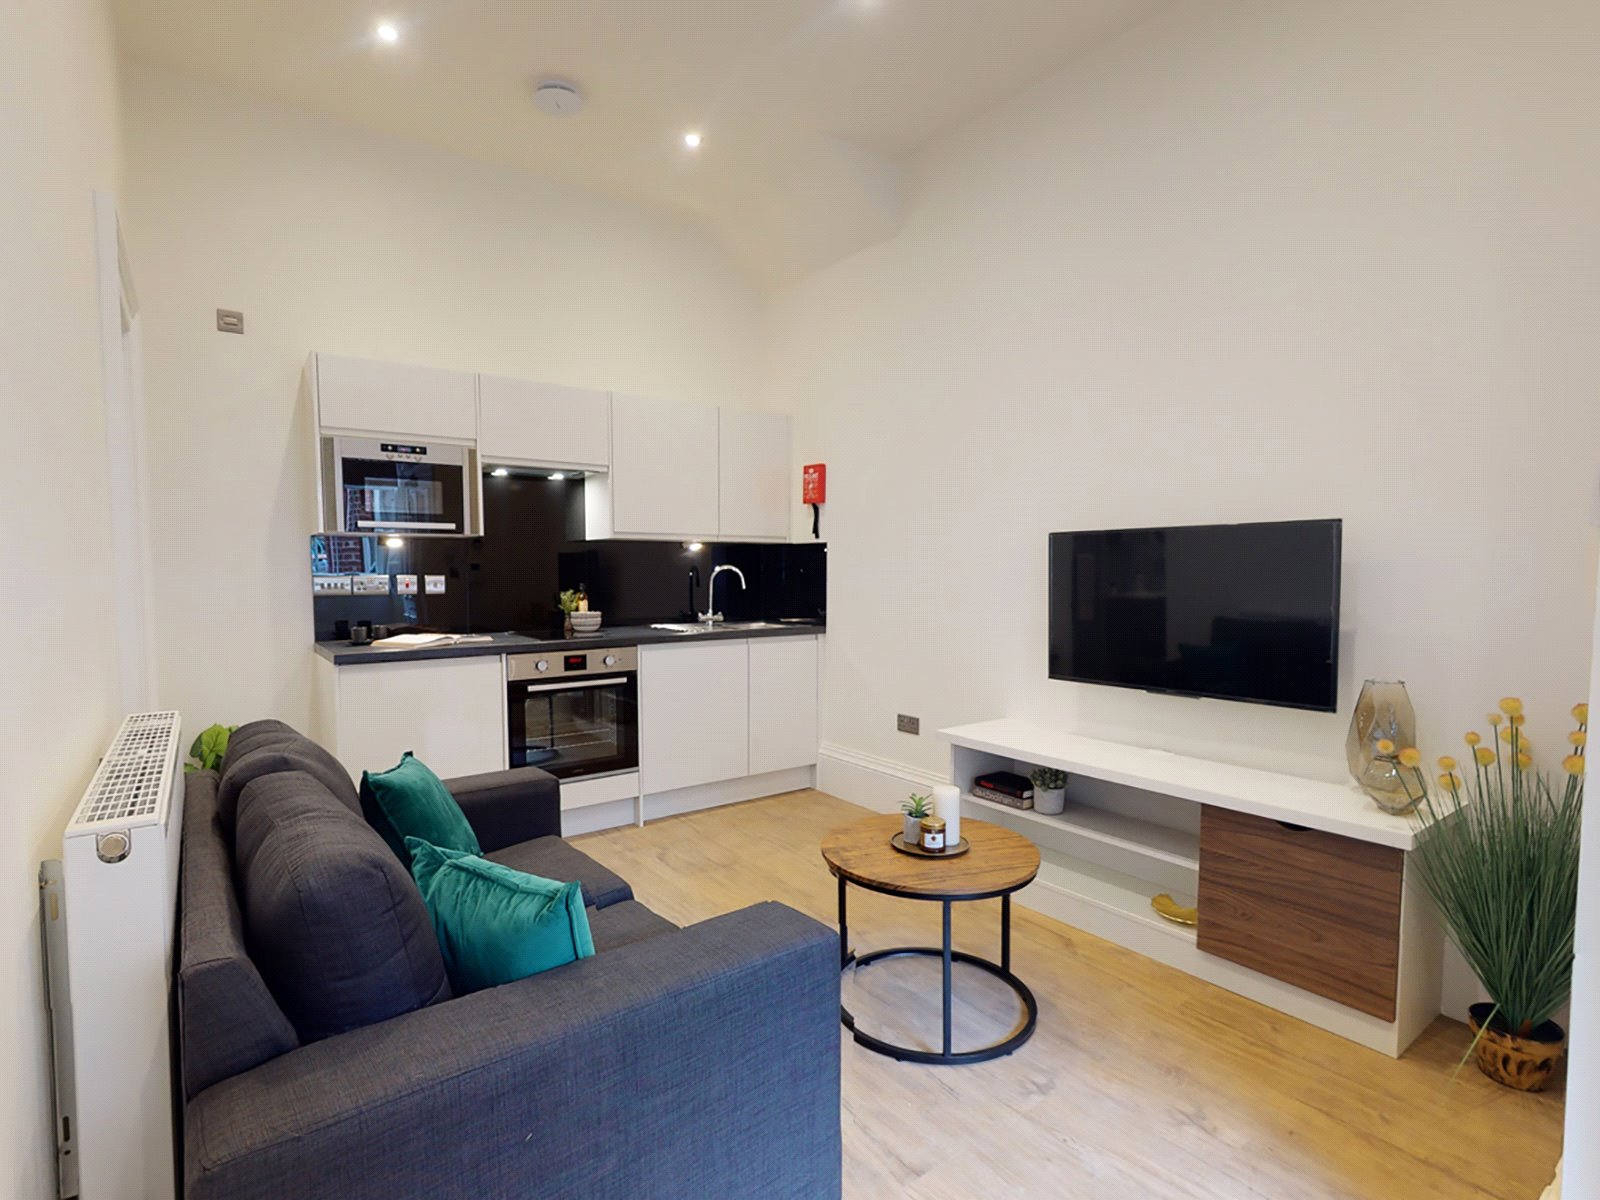 1 bed apartment for rent in Leeds. From YPP - Leeds